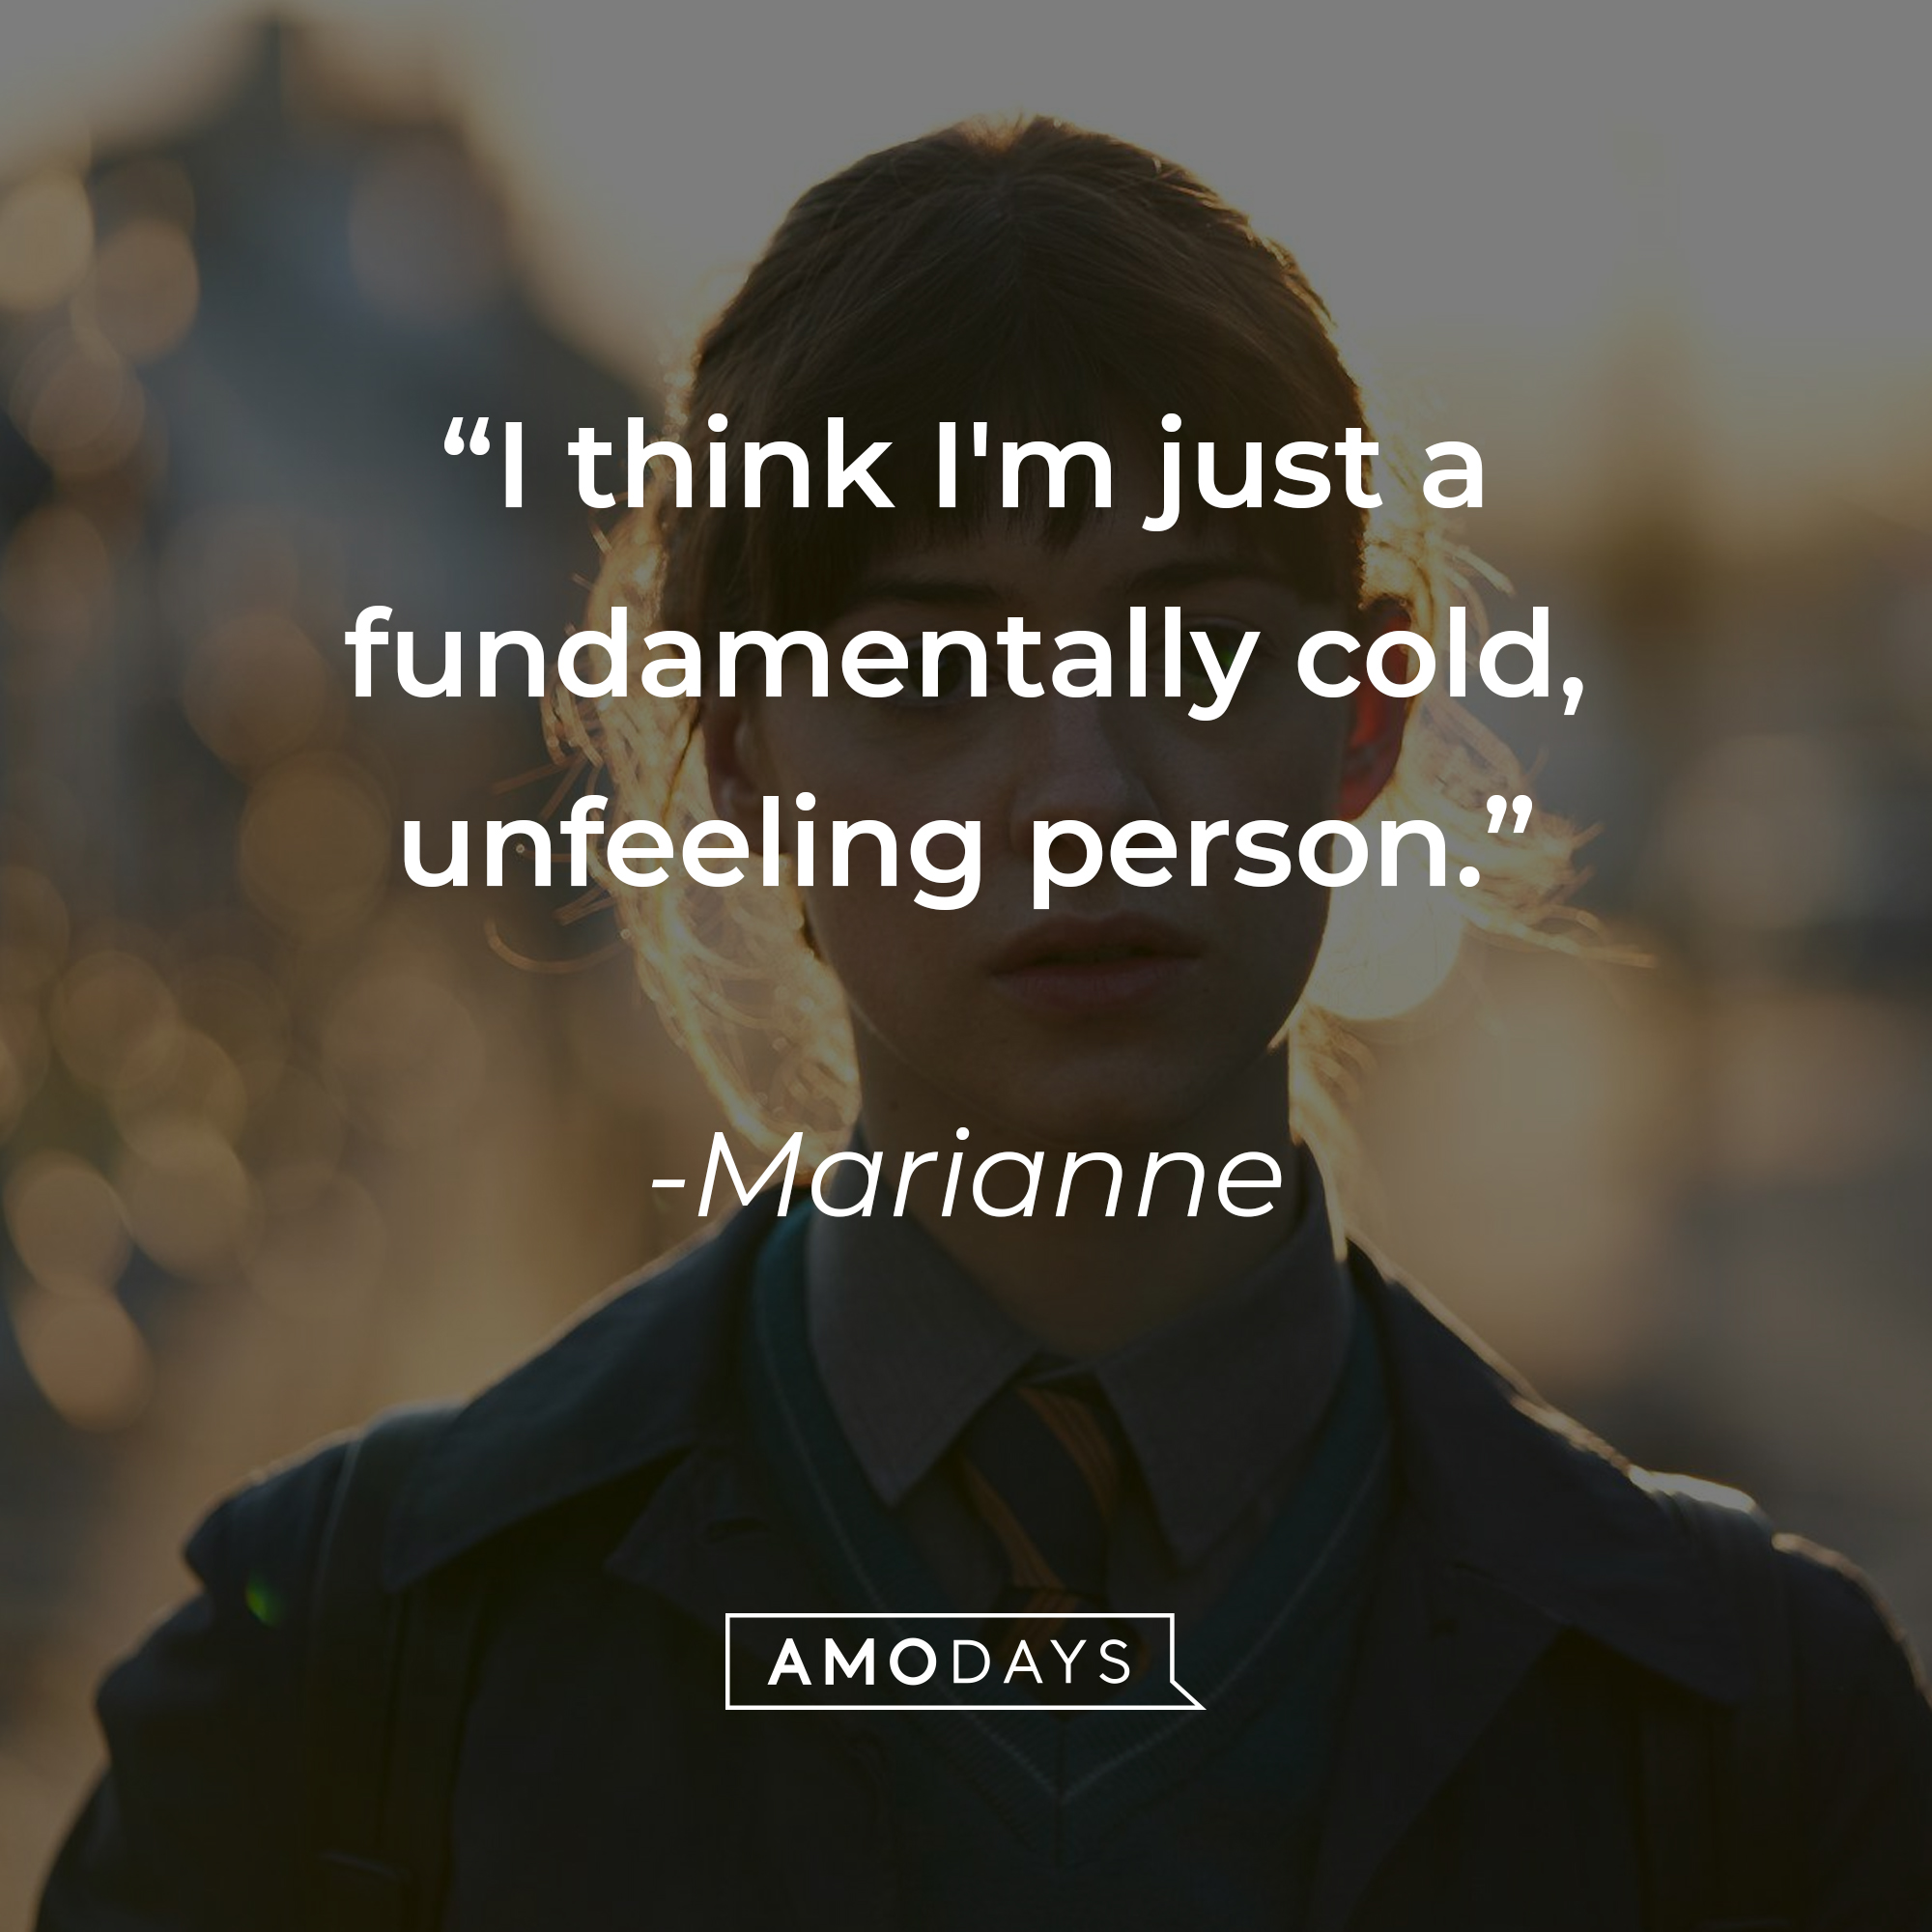 Marianne, with her quote: “I think I'm just a fundamentally cold, unfeeling person.” | Source: facebook.com/normalpeoplebbc